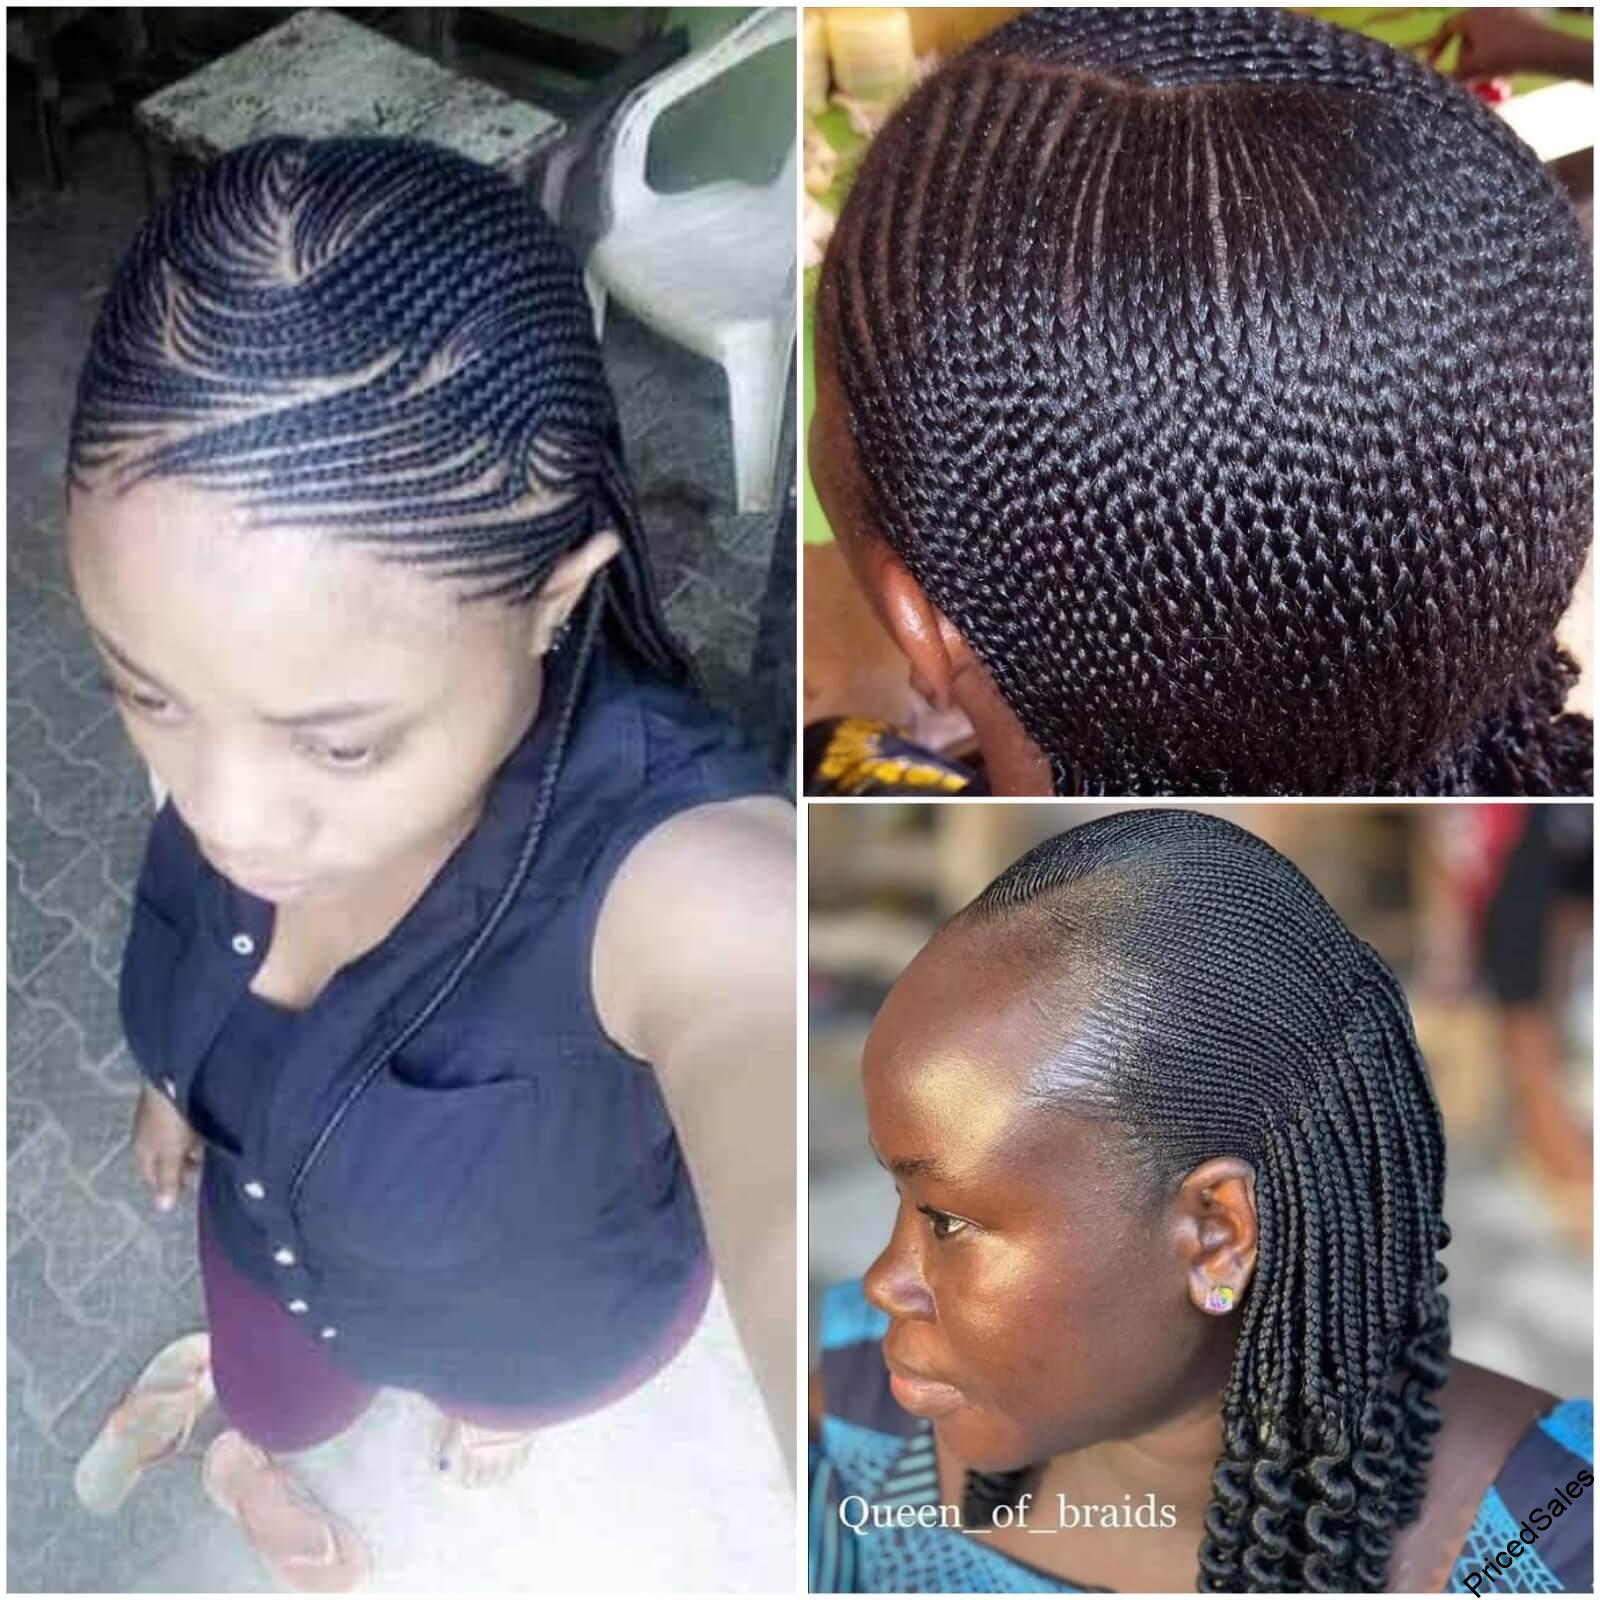 Tiny weaving hairstyles in Nigeria